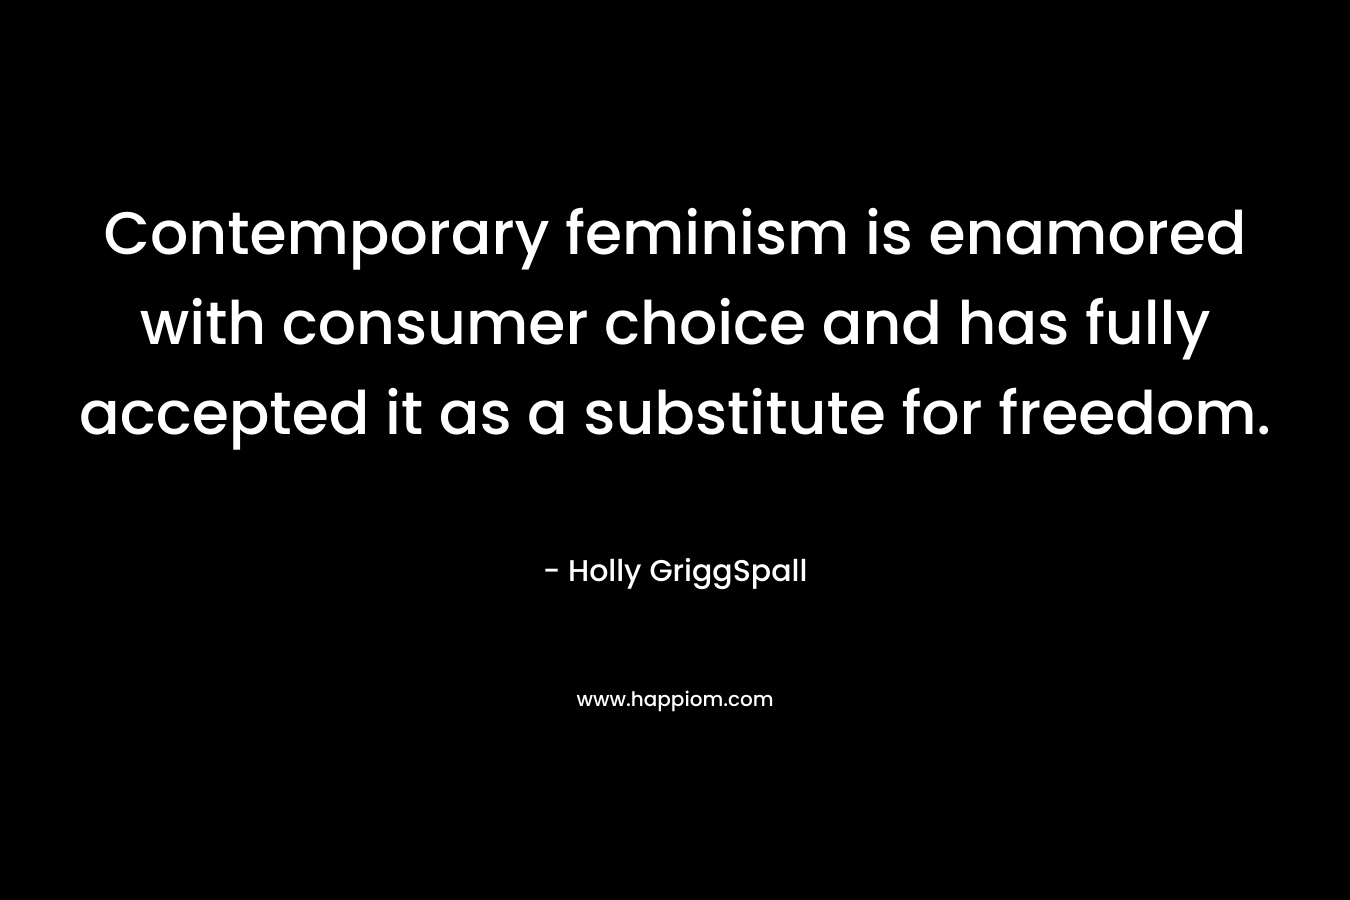 Contemporary feminism is enamored with consumer choice and has fully accepted it as a substitute for freedom. – Holly GriggSpall